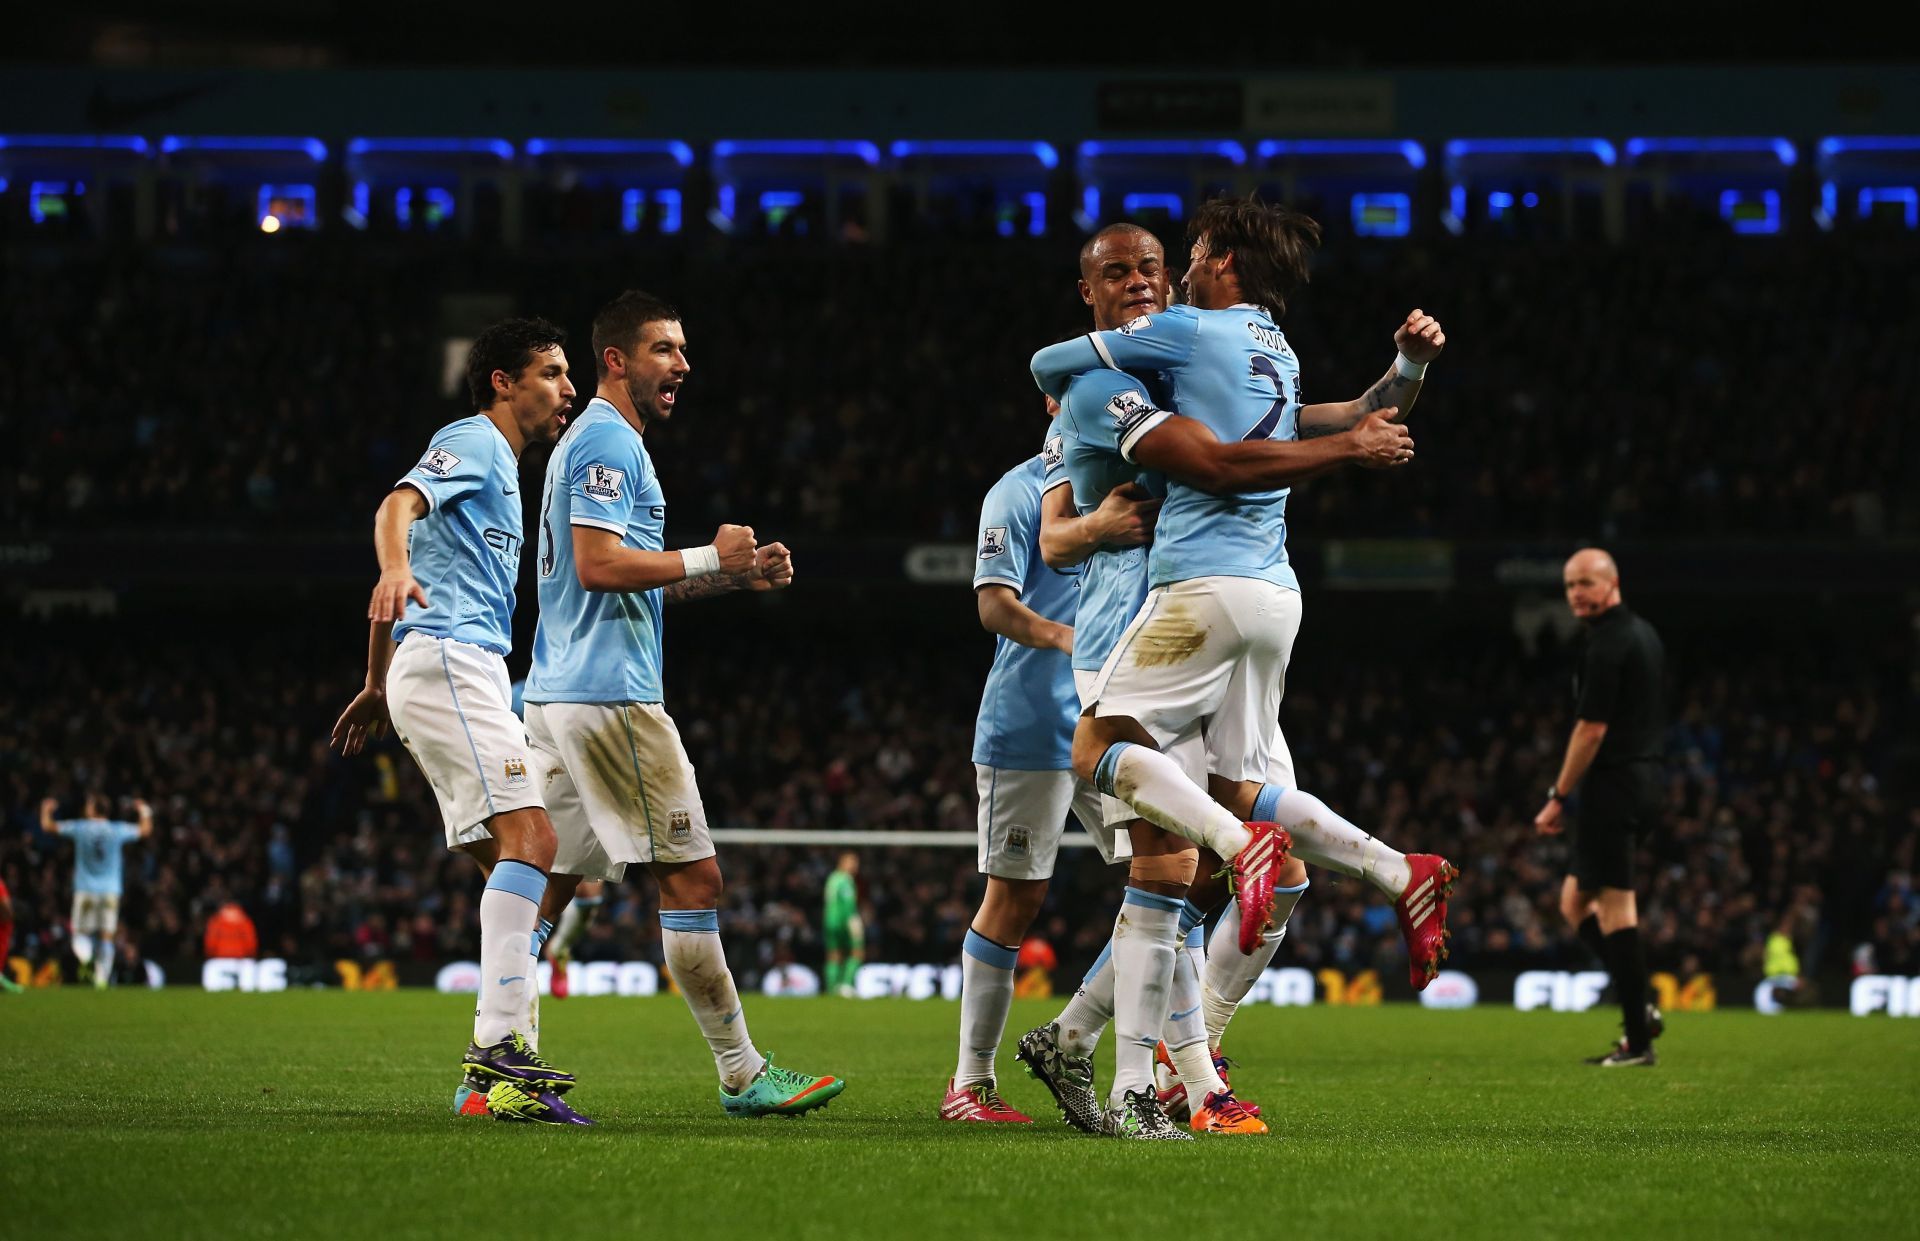 Manchester City managed 102 goals in the 2013-14 EPL